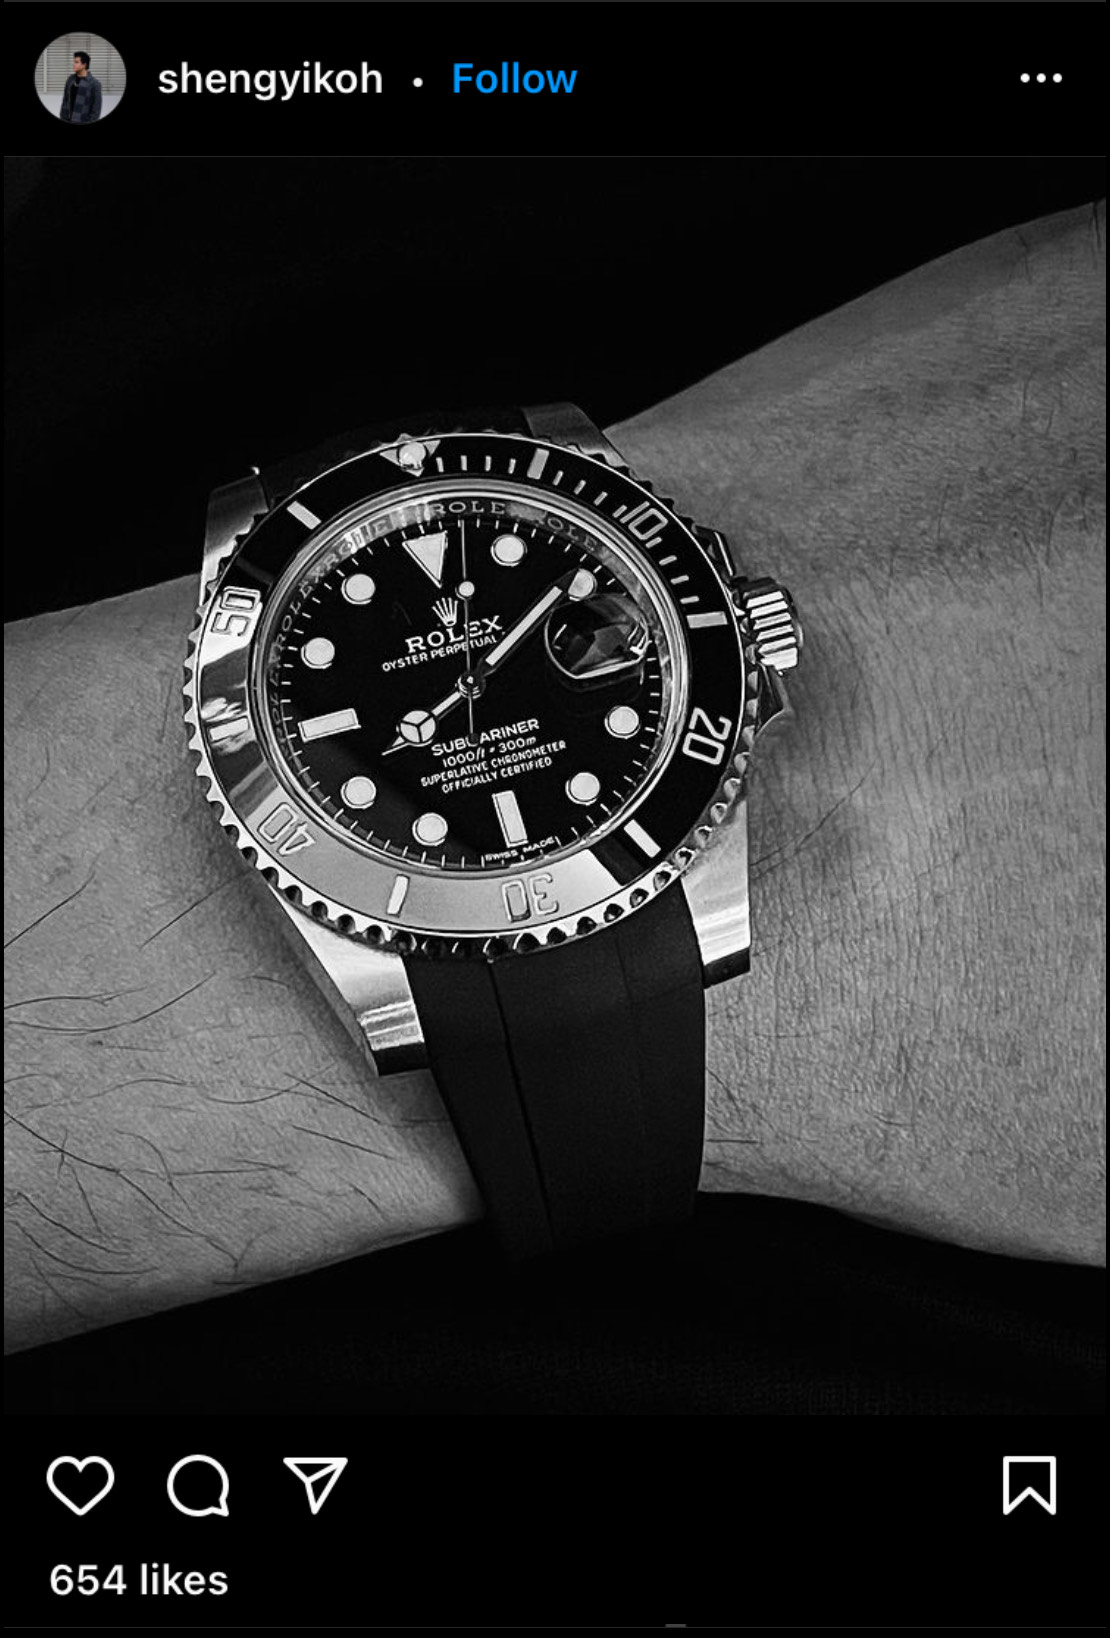 Best rubber straps for the Rolex Submariner 